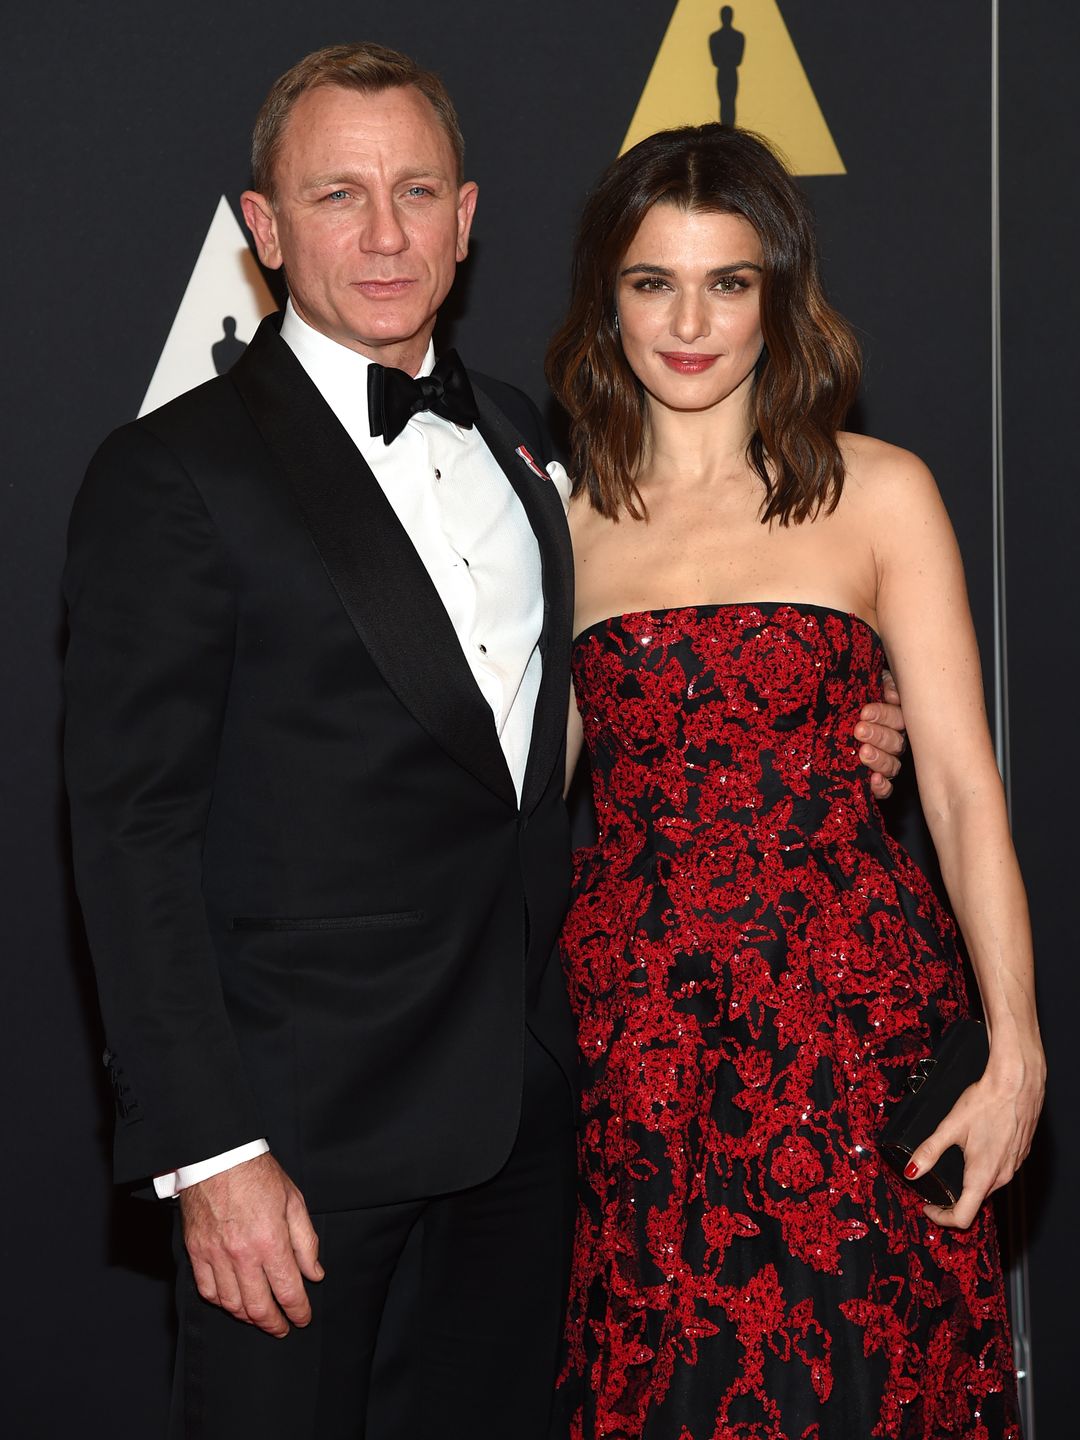 Daniel Craig and Rachel Weisz at the AMPAS Governors Awards